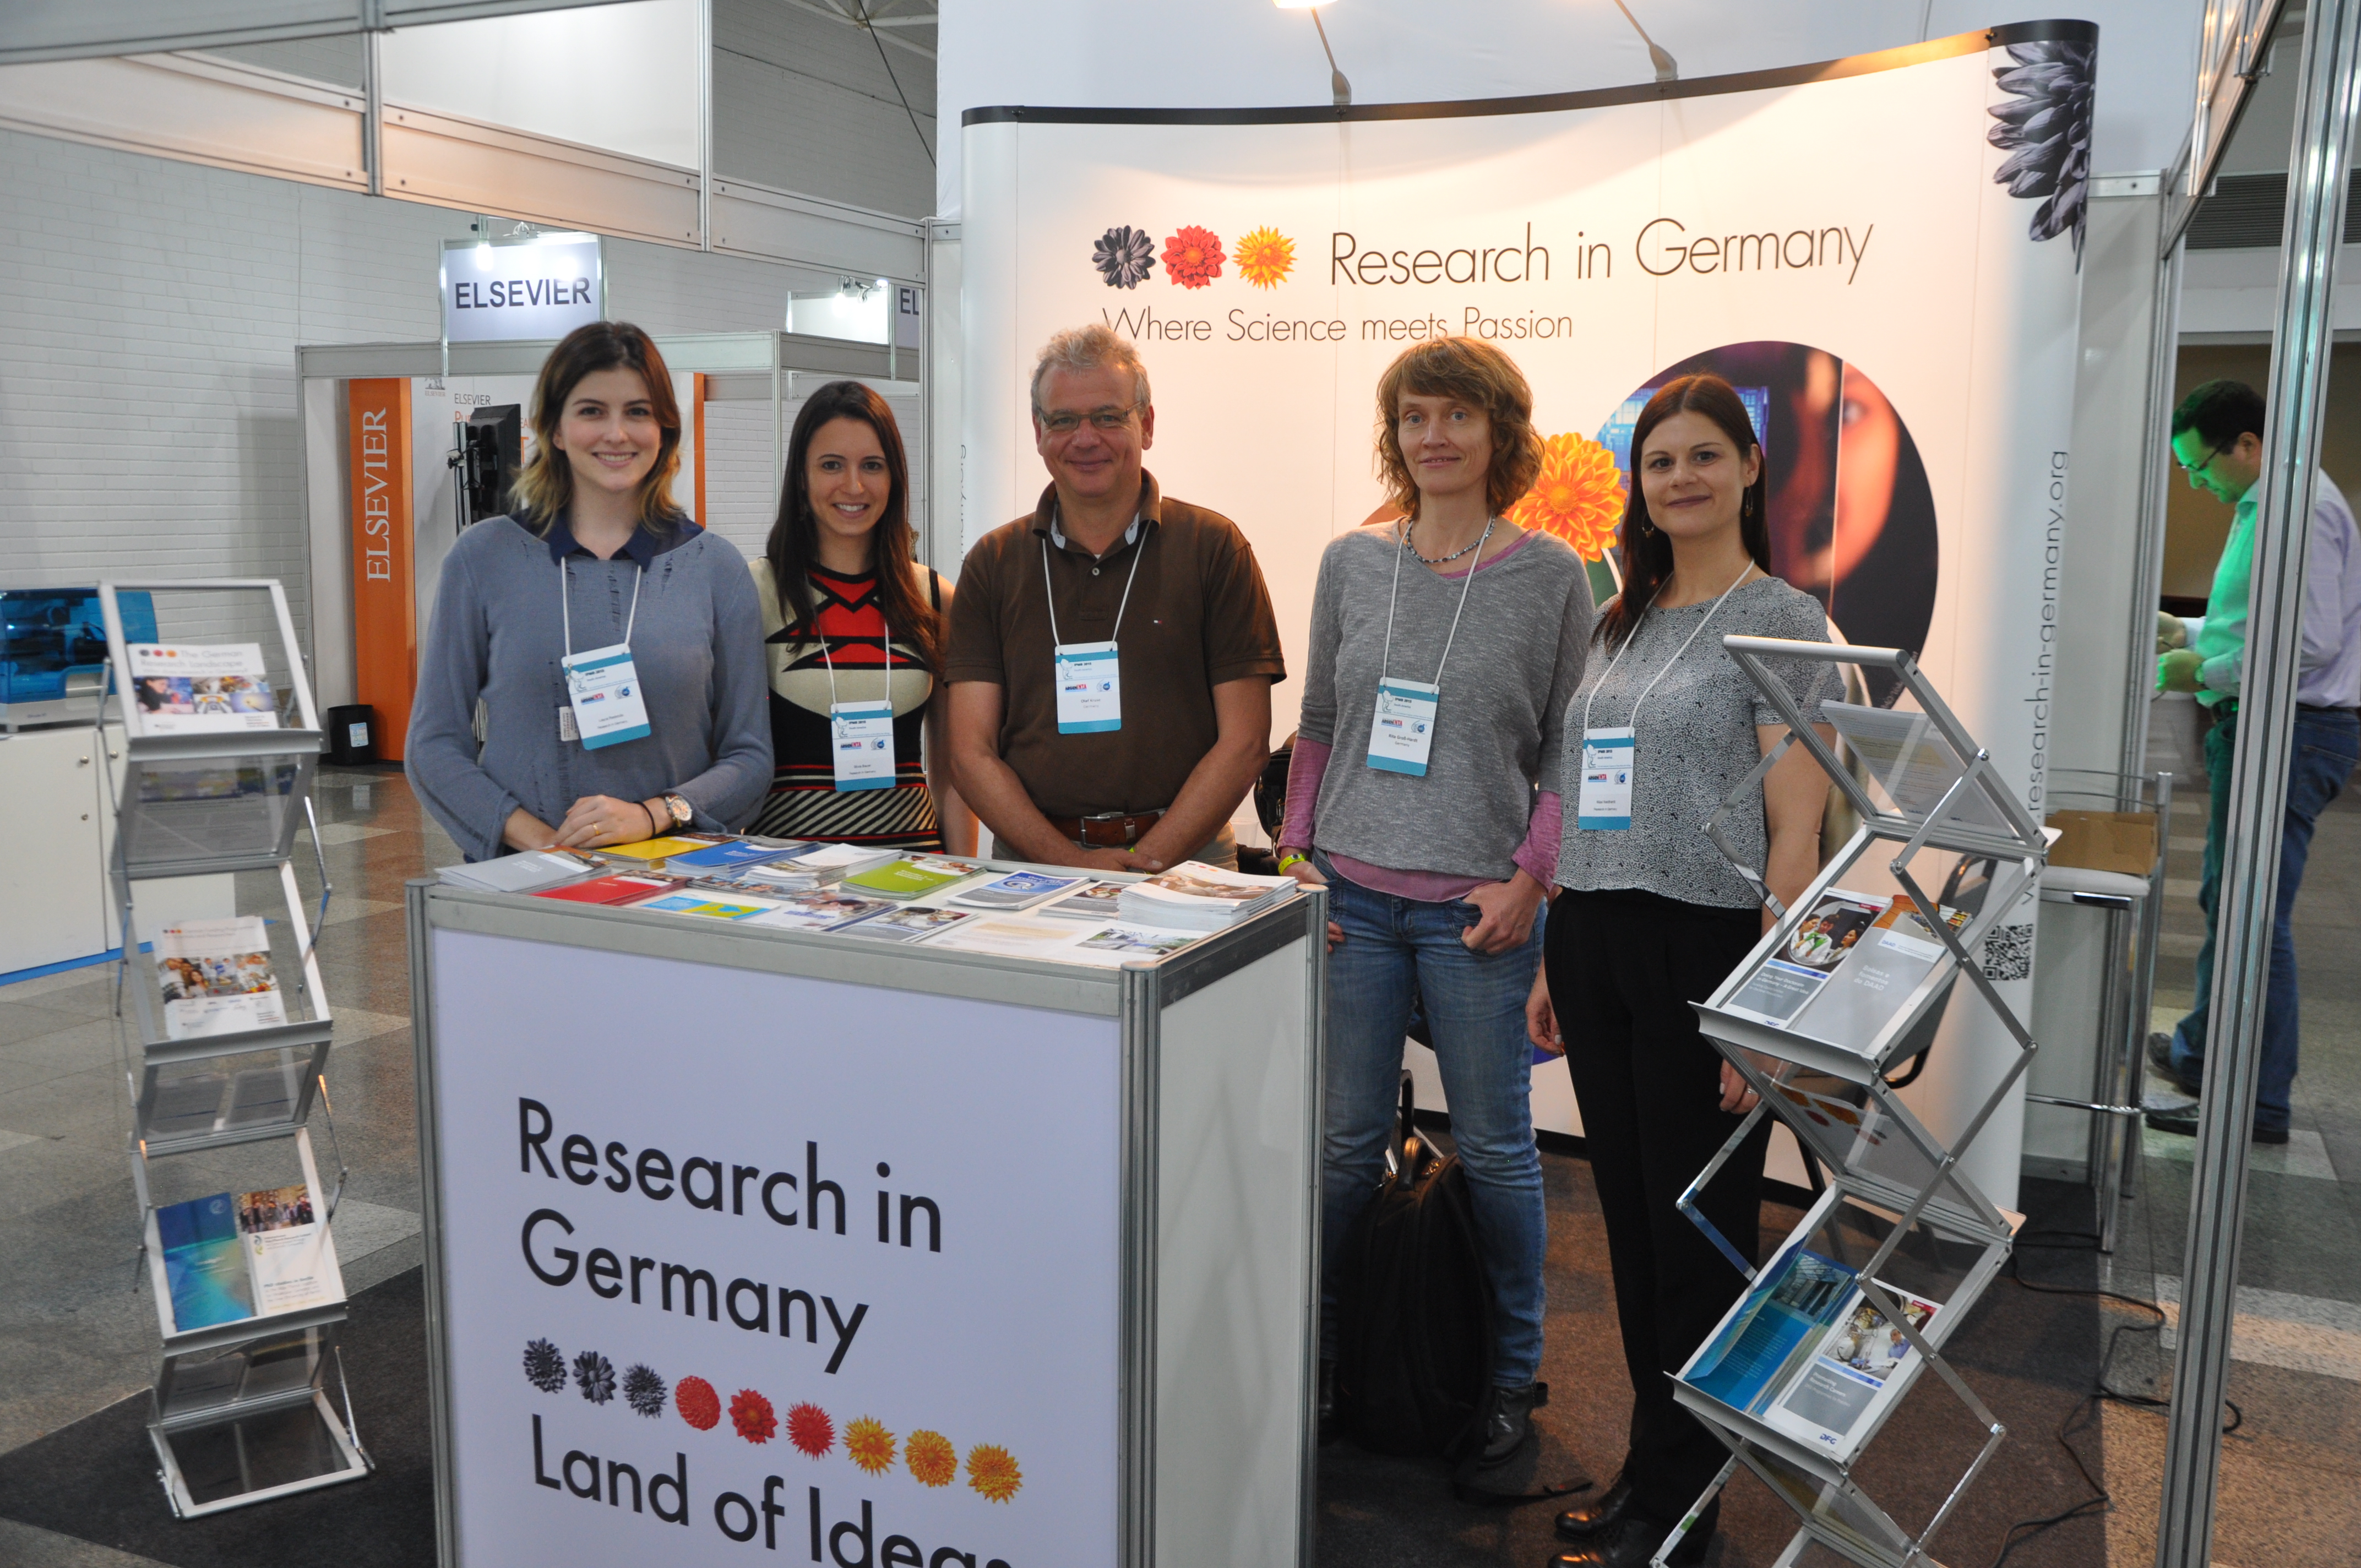 At the Research in Germany stand, Left to right: Laura Redondo, Silvia Bauer, Professor Dr. Olaf Kruse, Professor Dr. Rita Gross-Hardt and Maxi Neidhardt